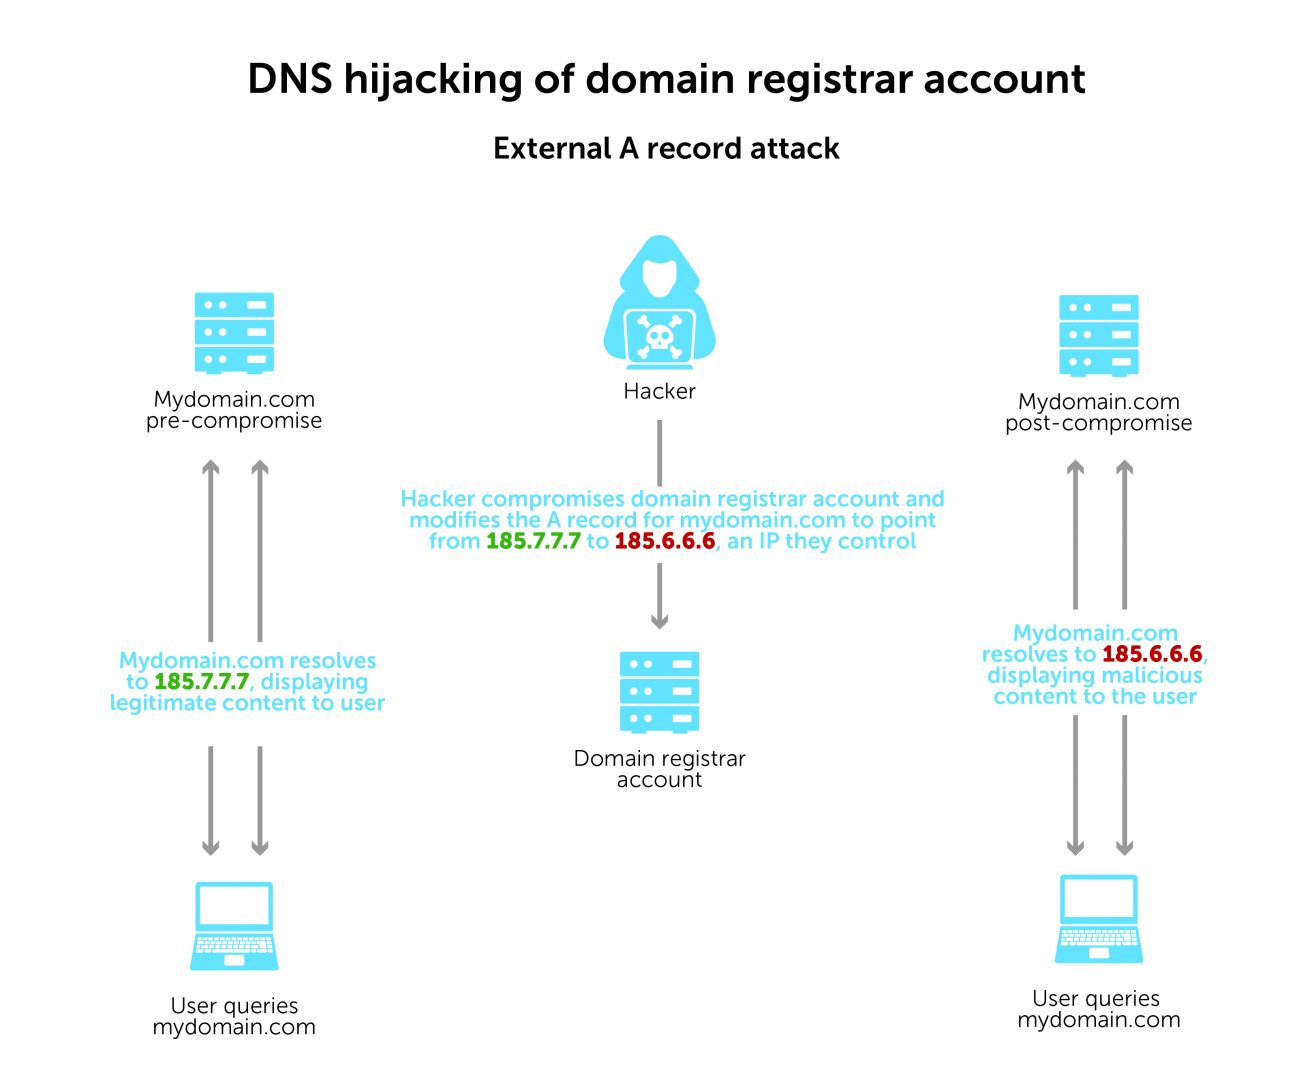 DNS response data detects DNS hijacking of A record in domain registrar account